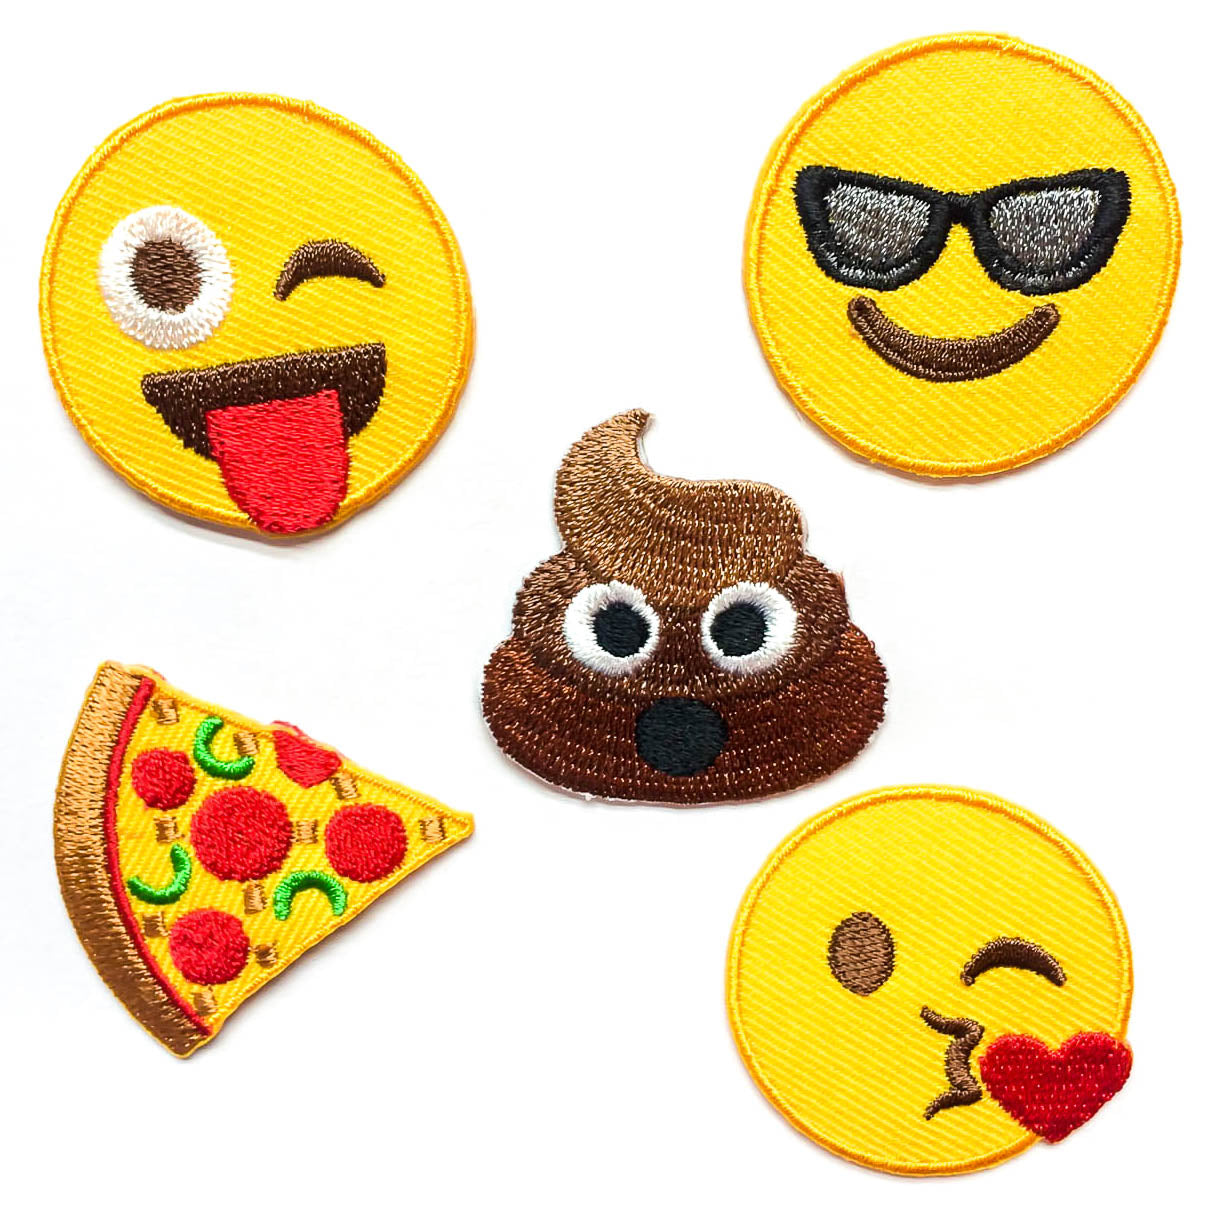 Emoji Patch - Your Choice of one